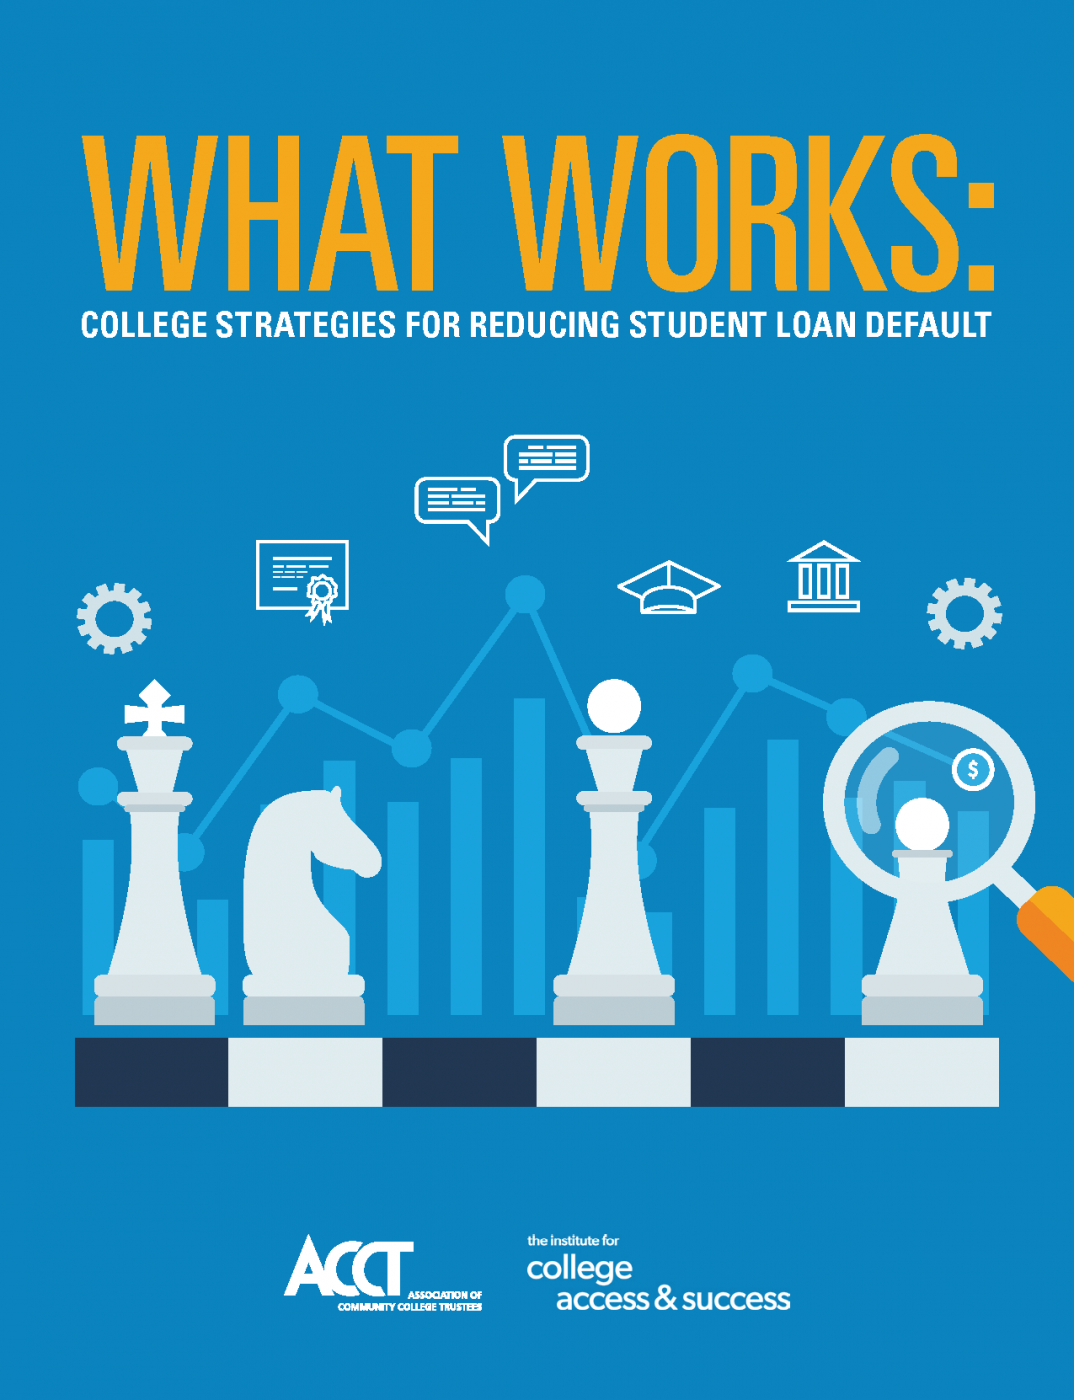 What Works: College Strategies for Reducing Student Loan Default (2020)